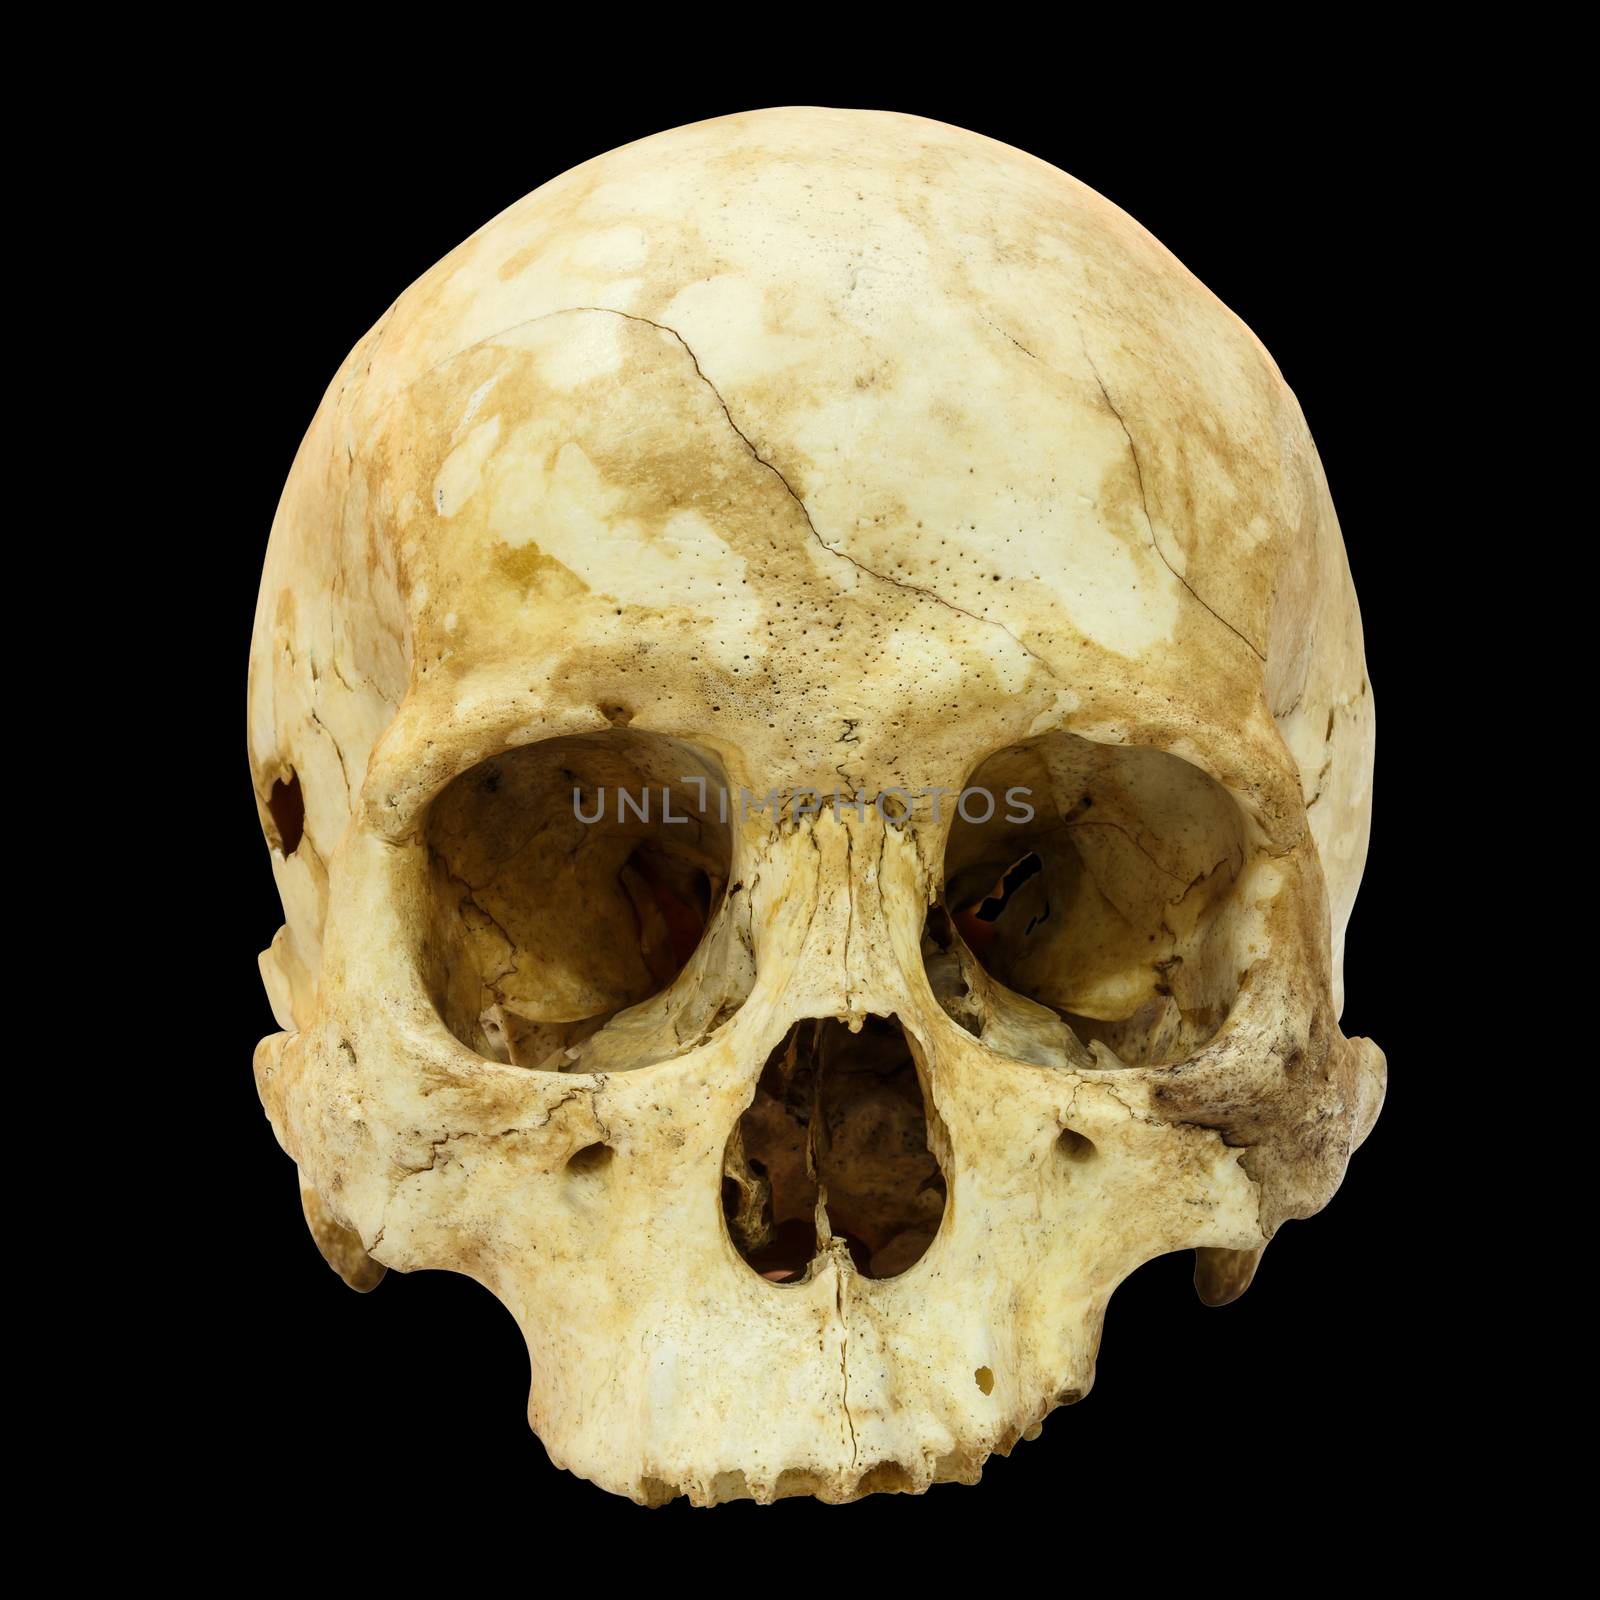 Human Skull Fracture (Mongoloid,Asian) on isolated background by stockdevil